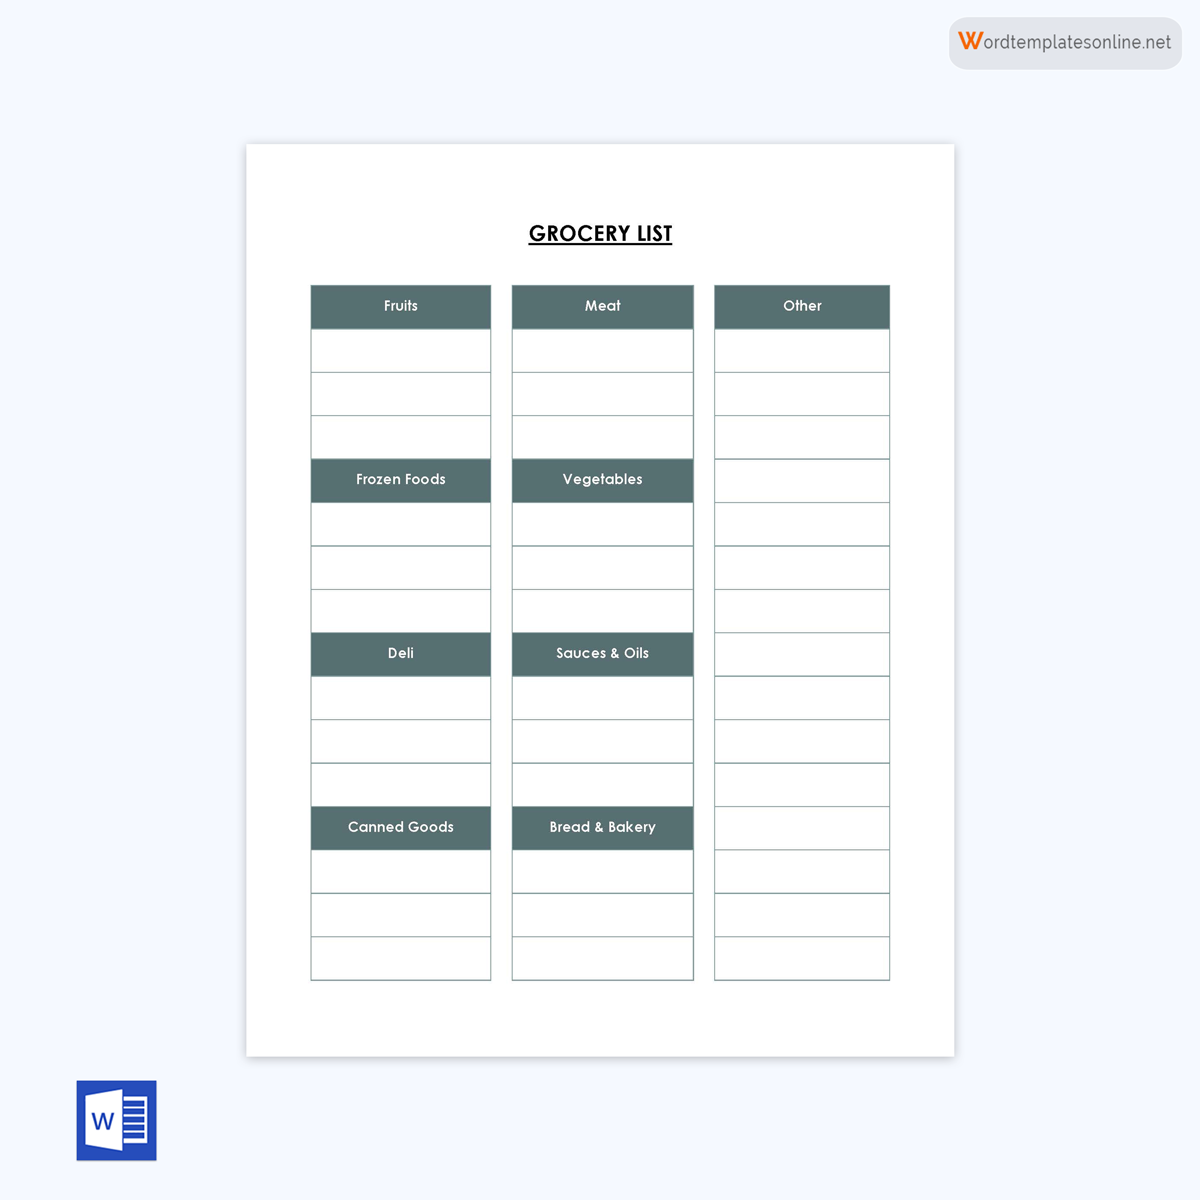 Great Customizable Grocery List Template 03 for Word File